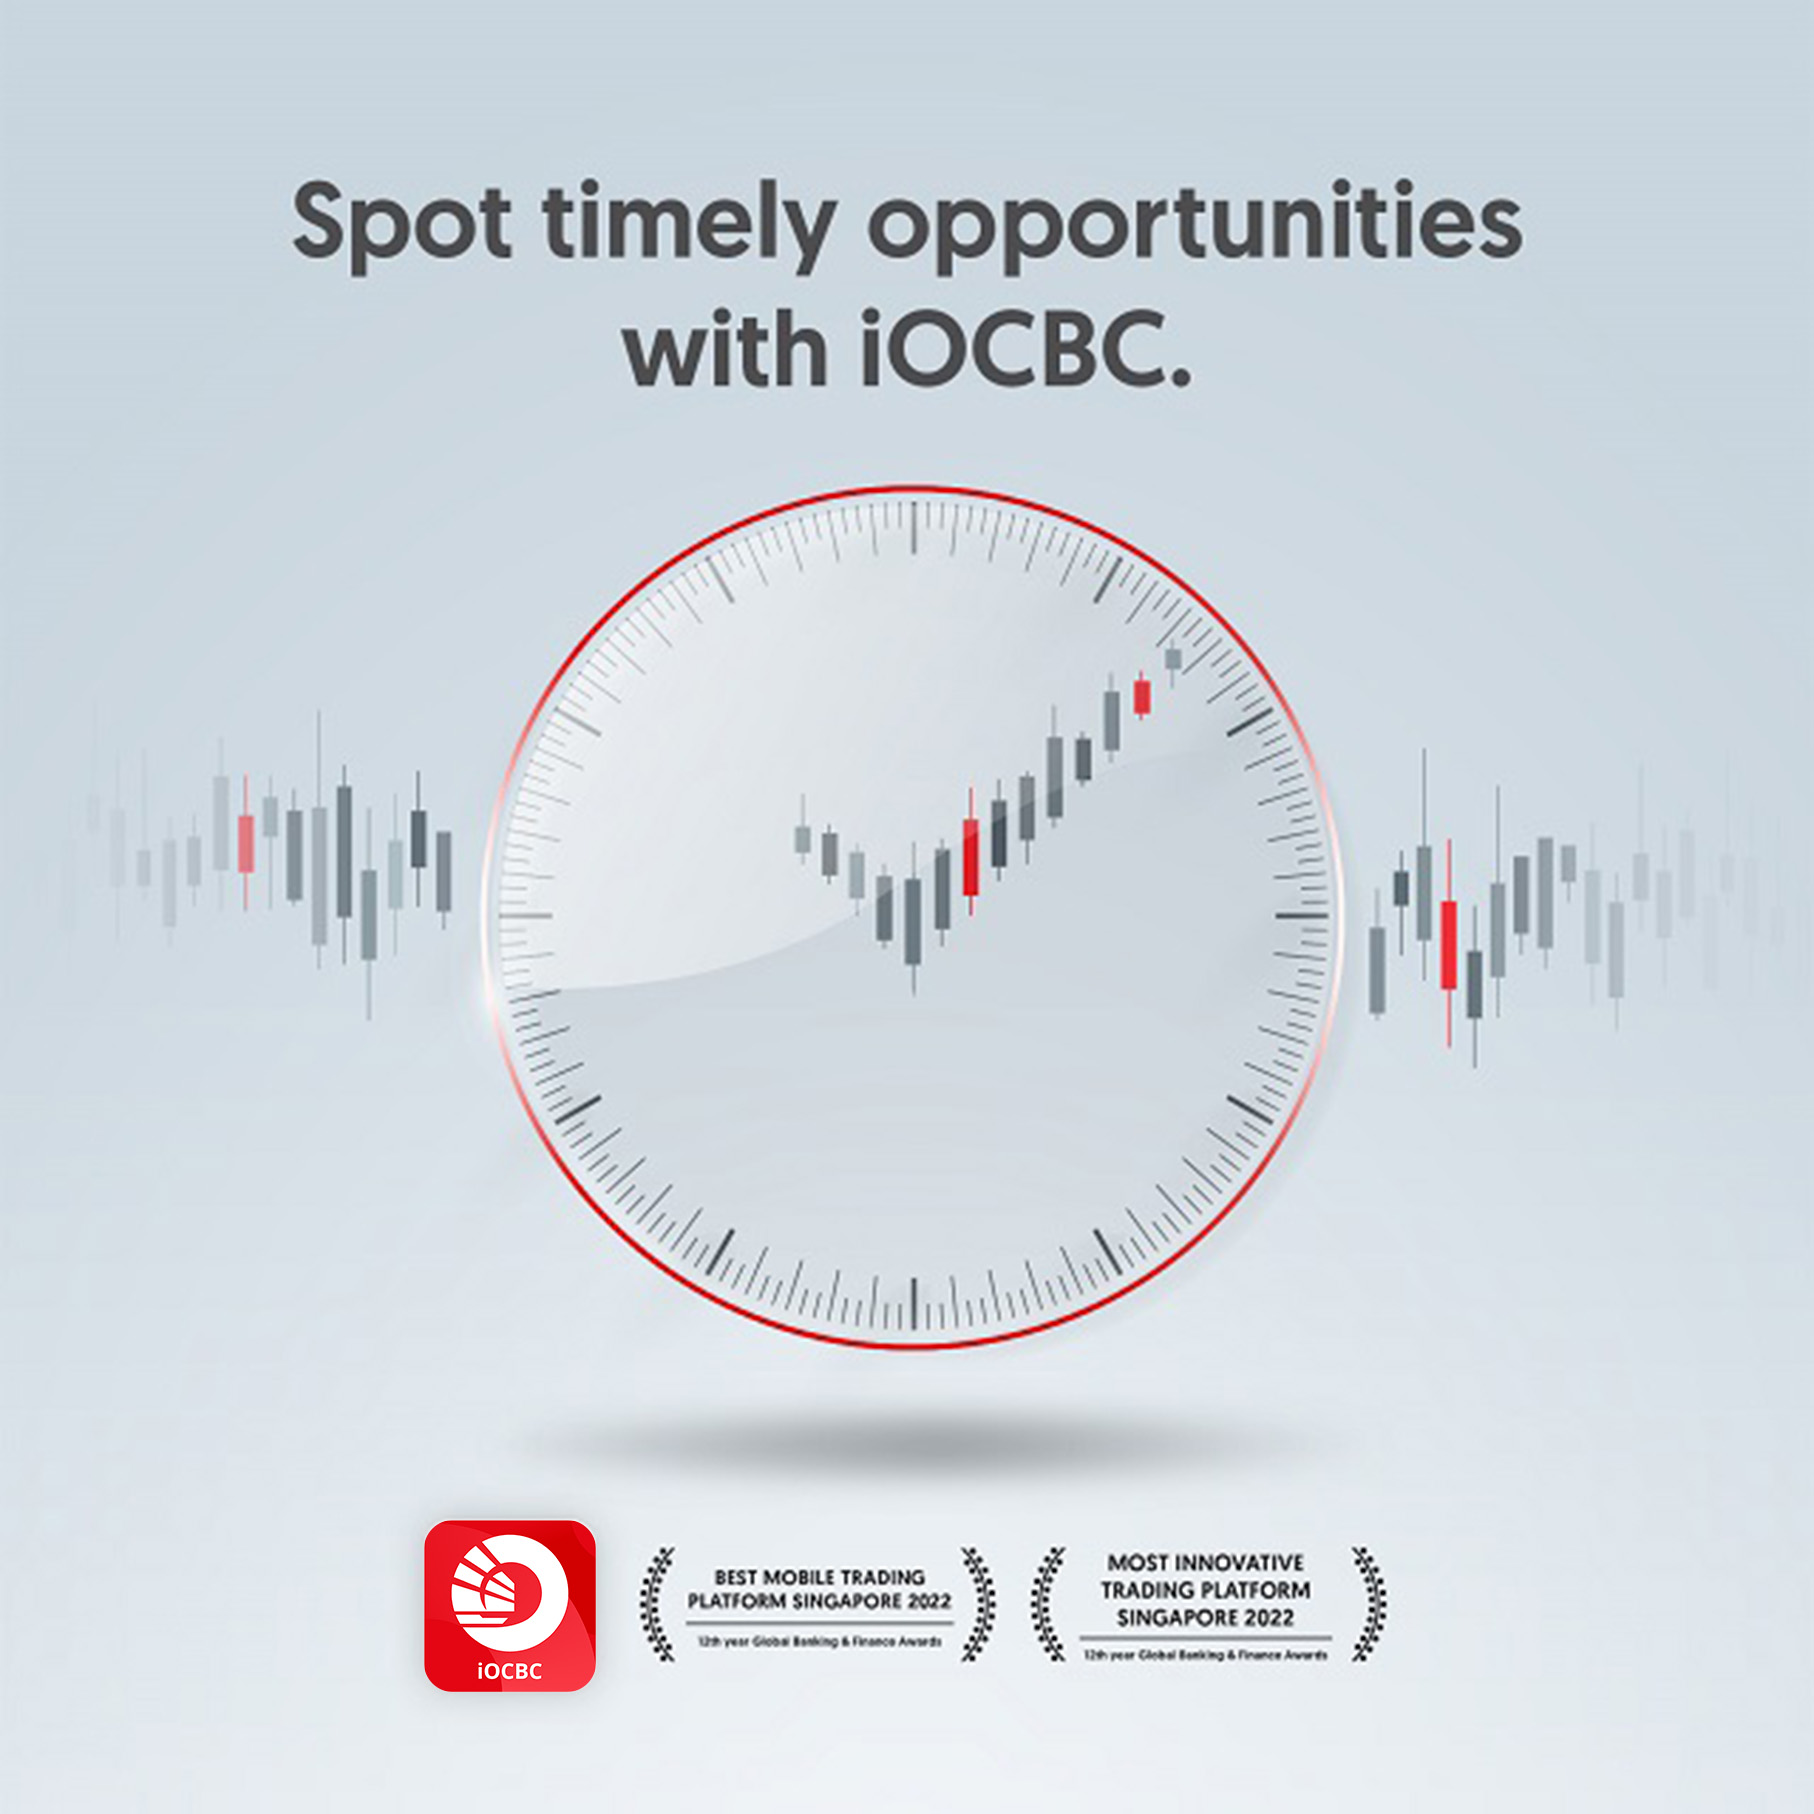 Spot timely opportunities with iOCBC.